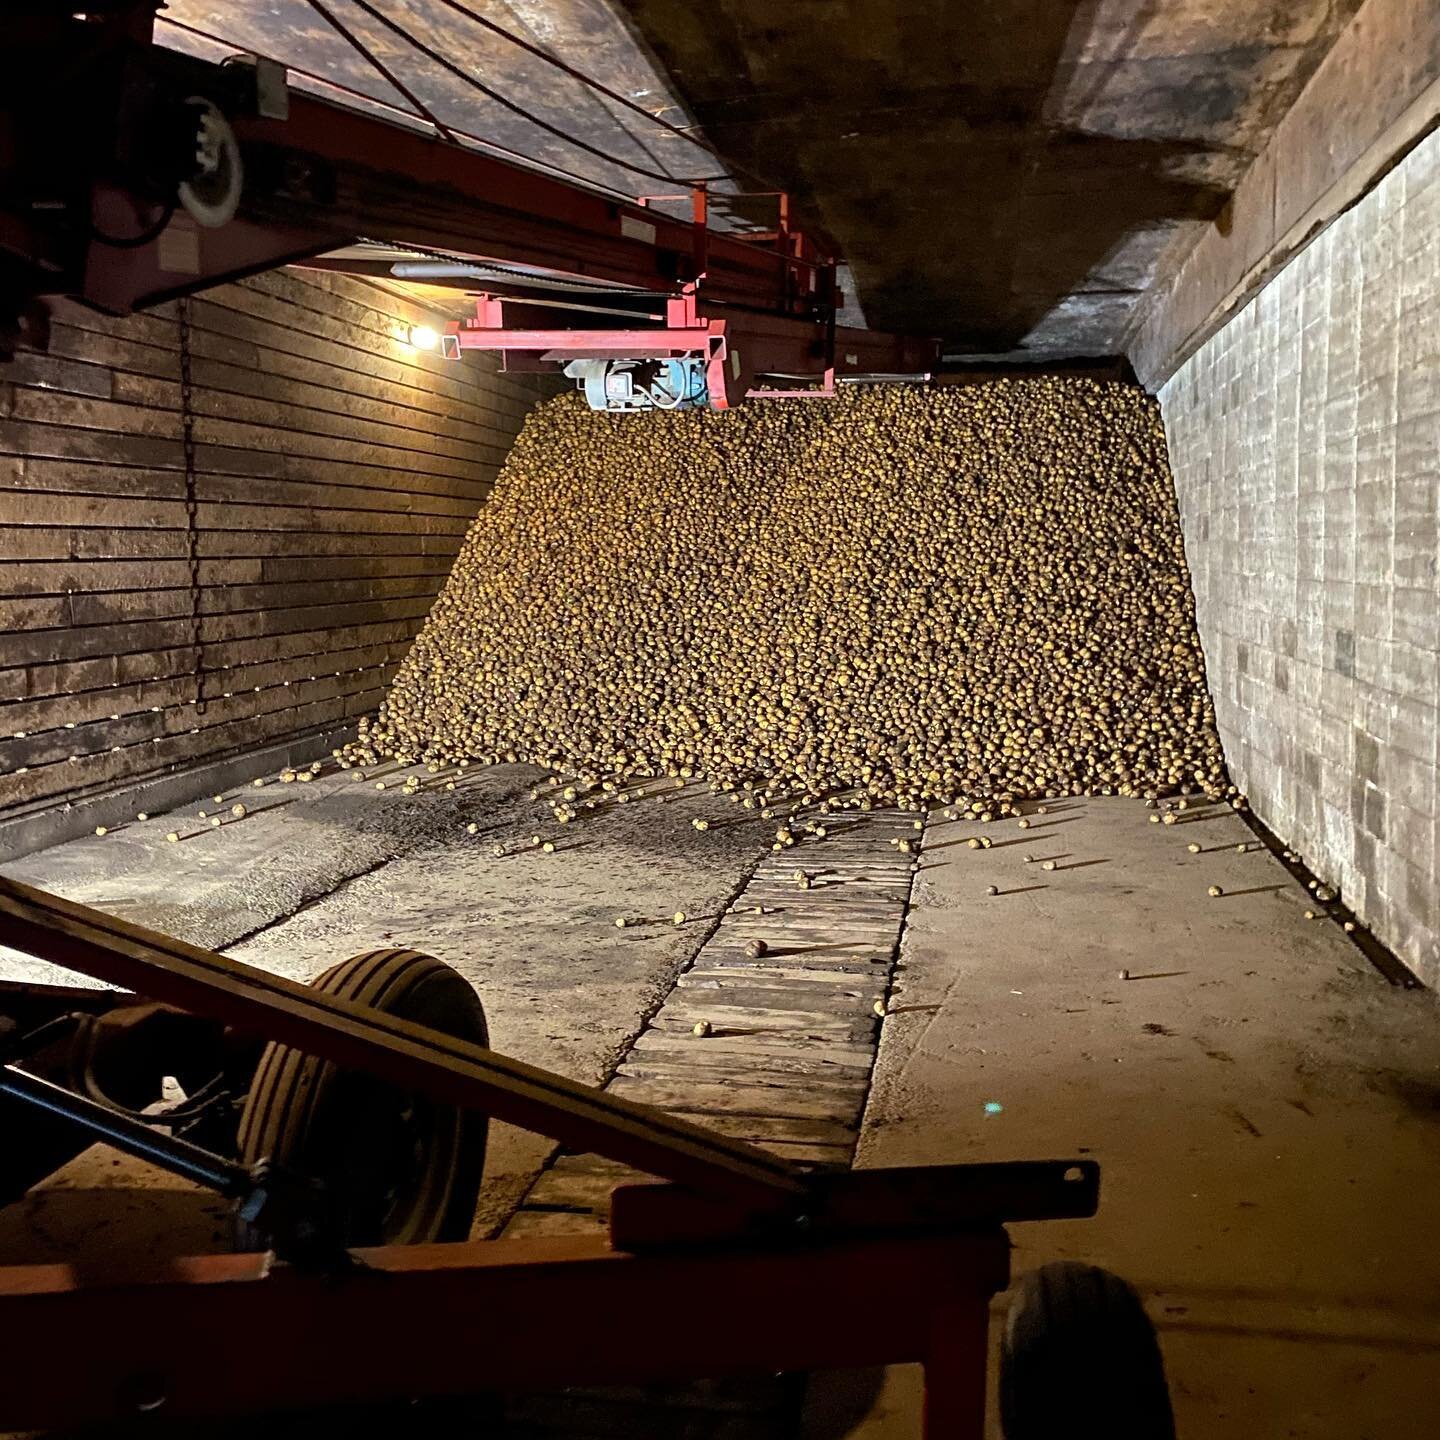 The potato barn. That&rsquo;s a whole lot of potatoes. They won&rsquo;t be in here long. We are shipping these freshly harvested potatoes to our local grocery stores daily. #potatoes#potatoefarming#potatoefarming#echovalleyfarm#localfarm#islandfarm#w